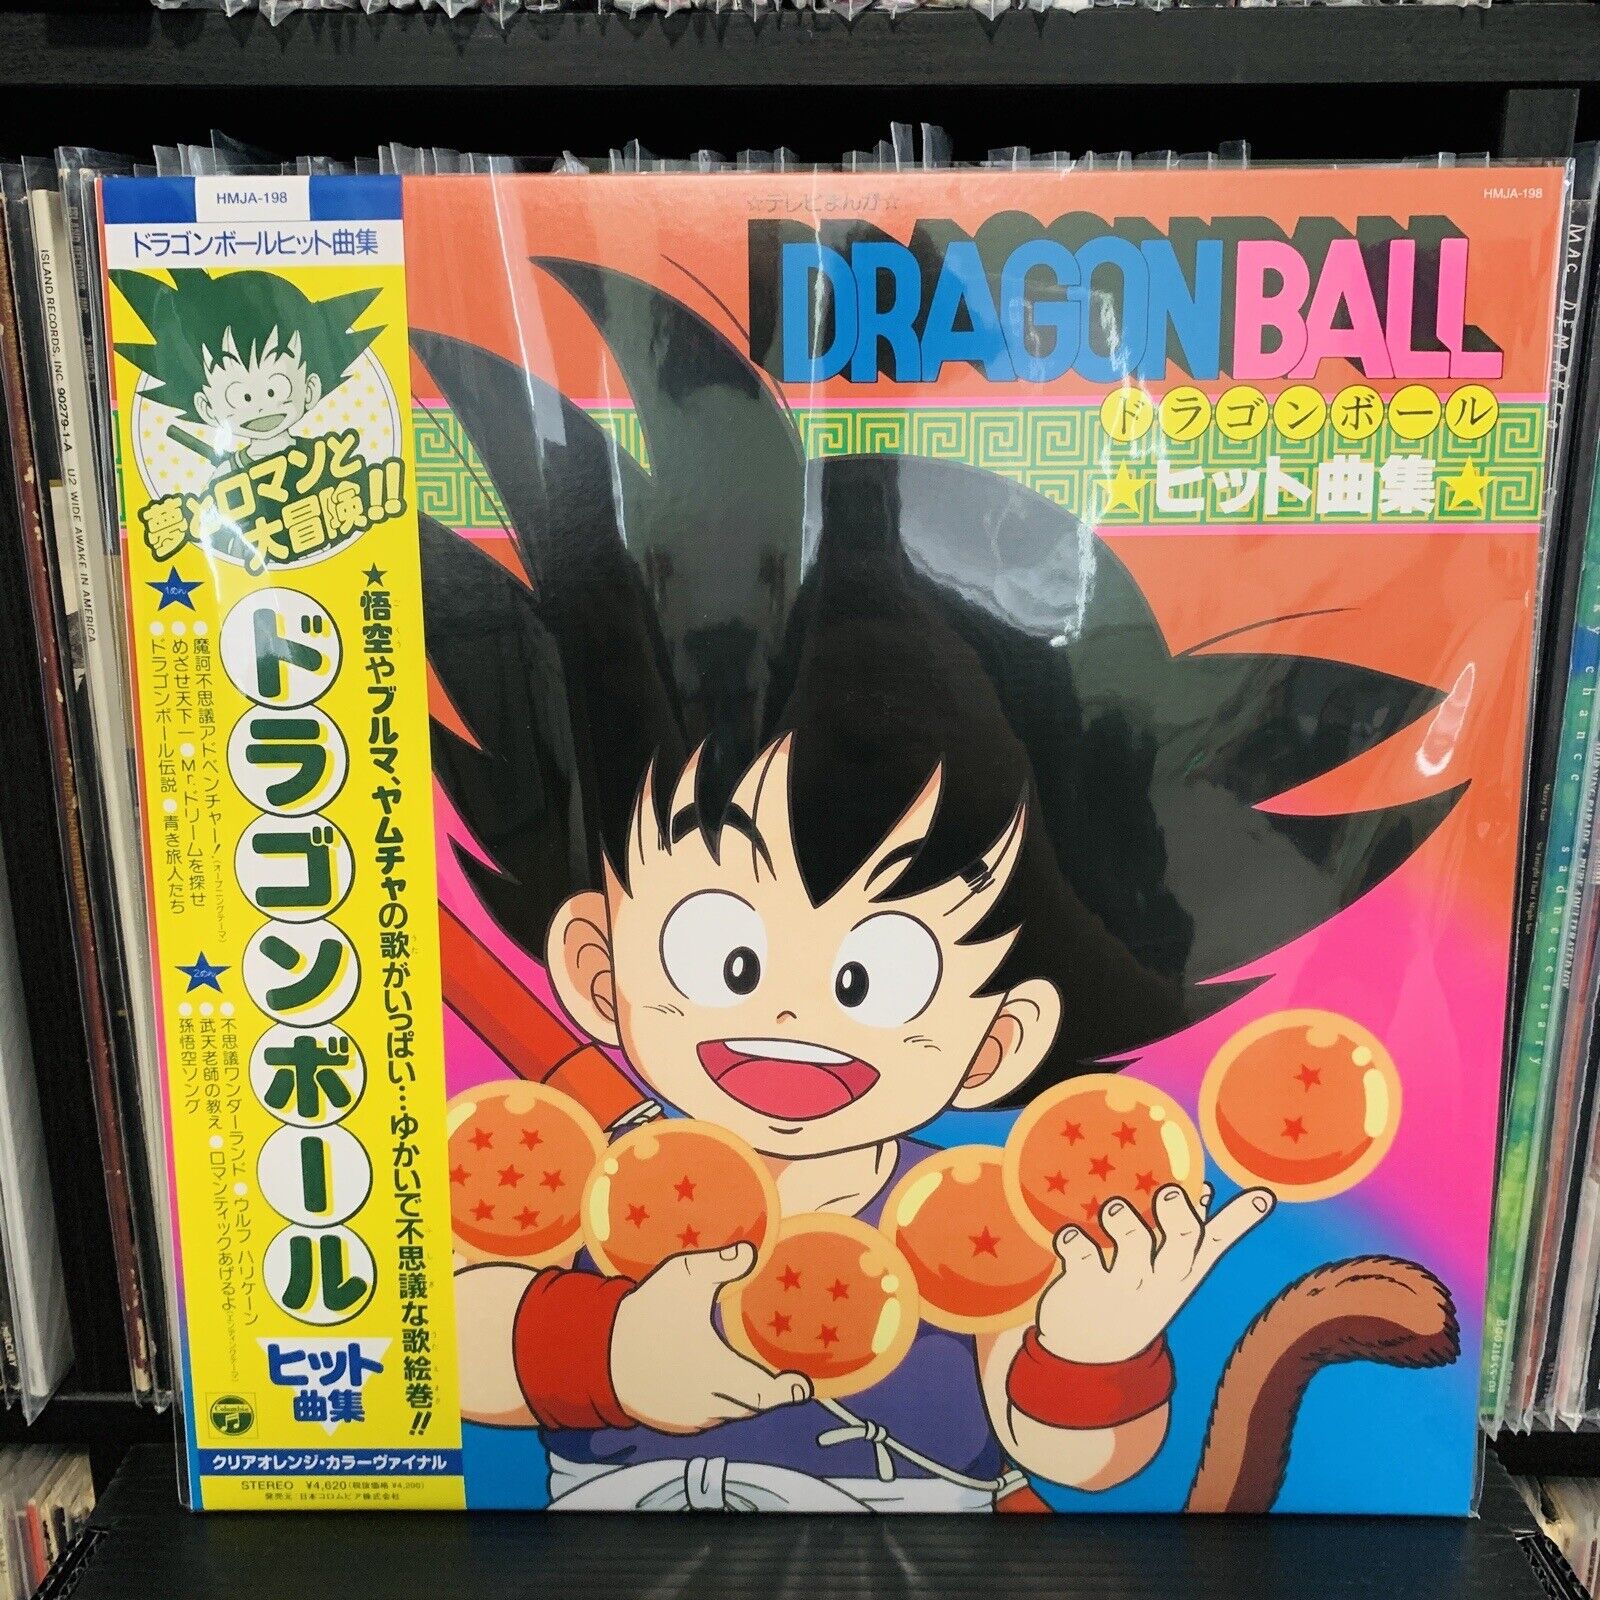 TV Manga Dragon Ball Hit Song Collection LP Record Anime Soundtrack LP OST NEW